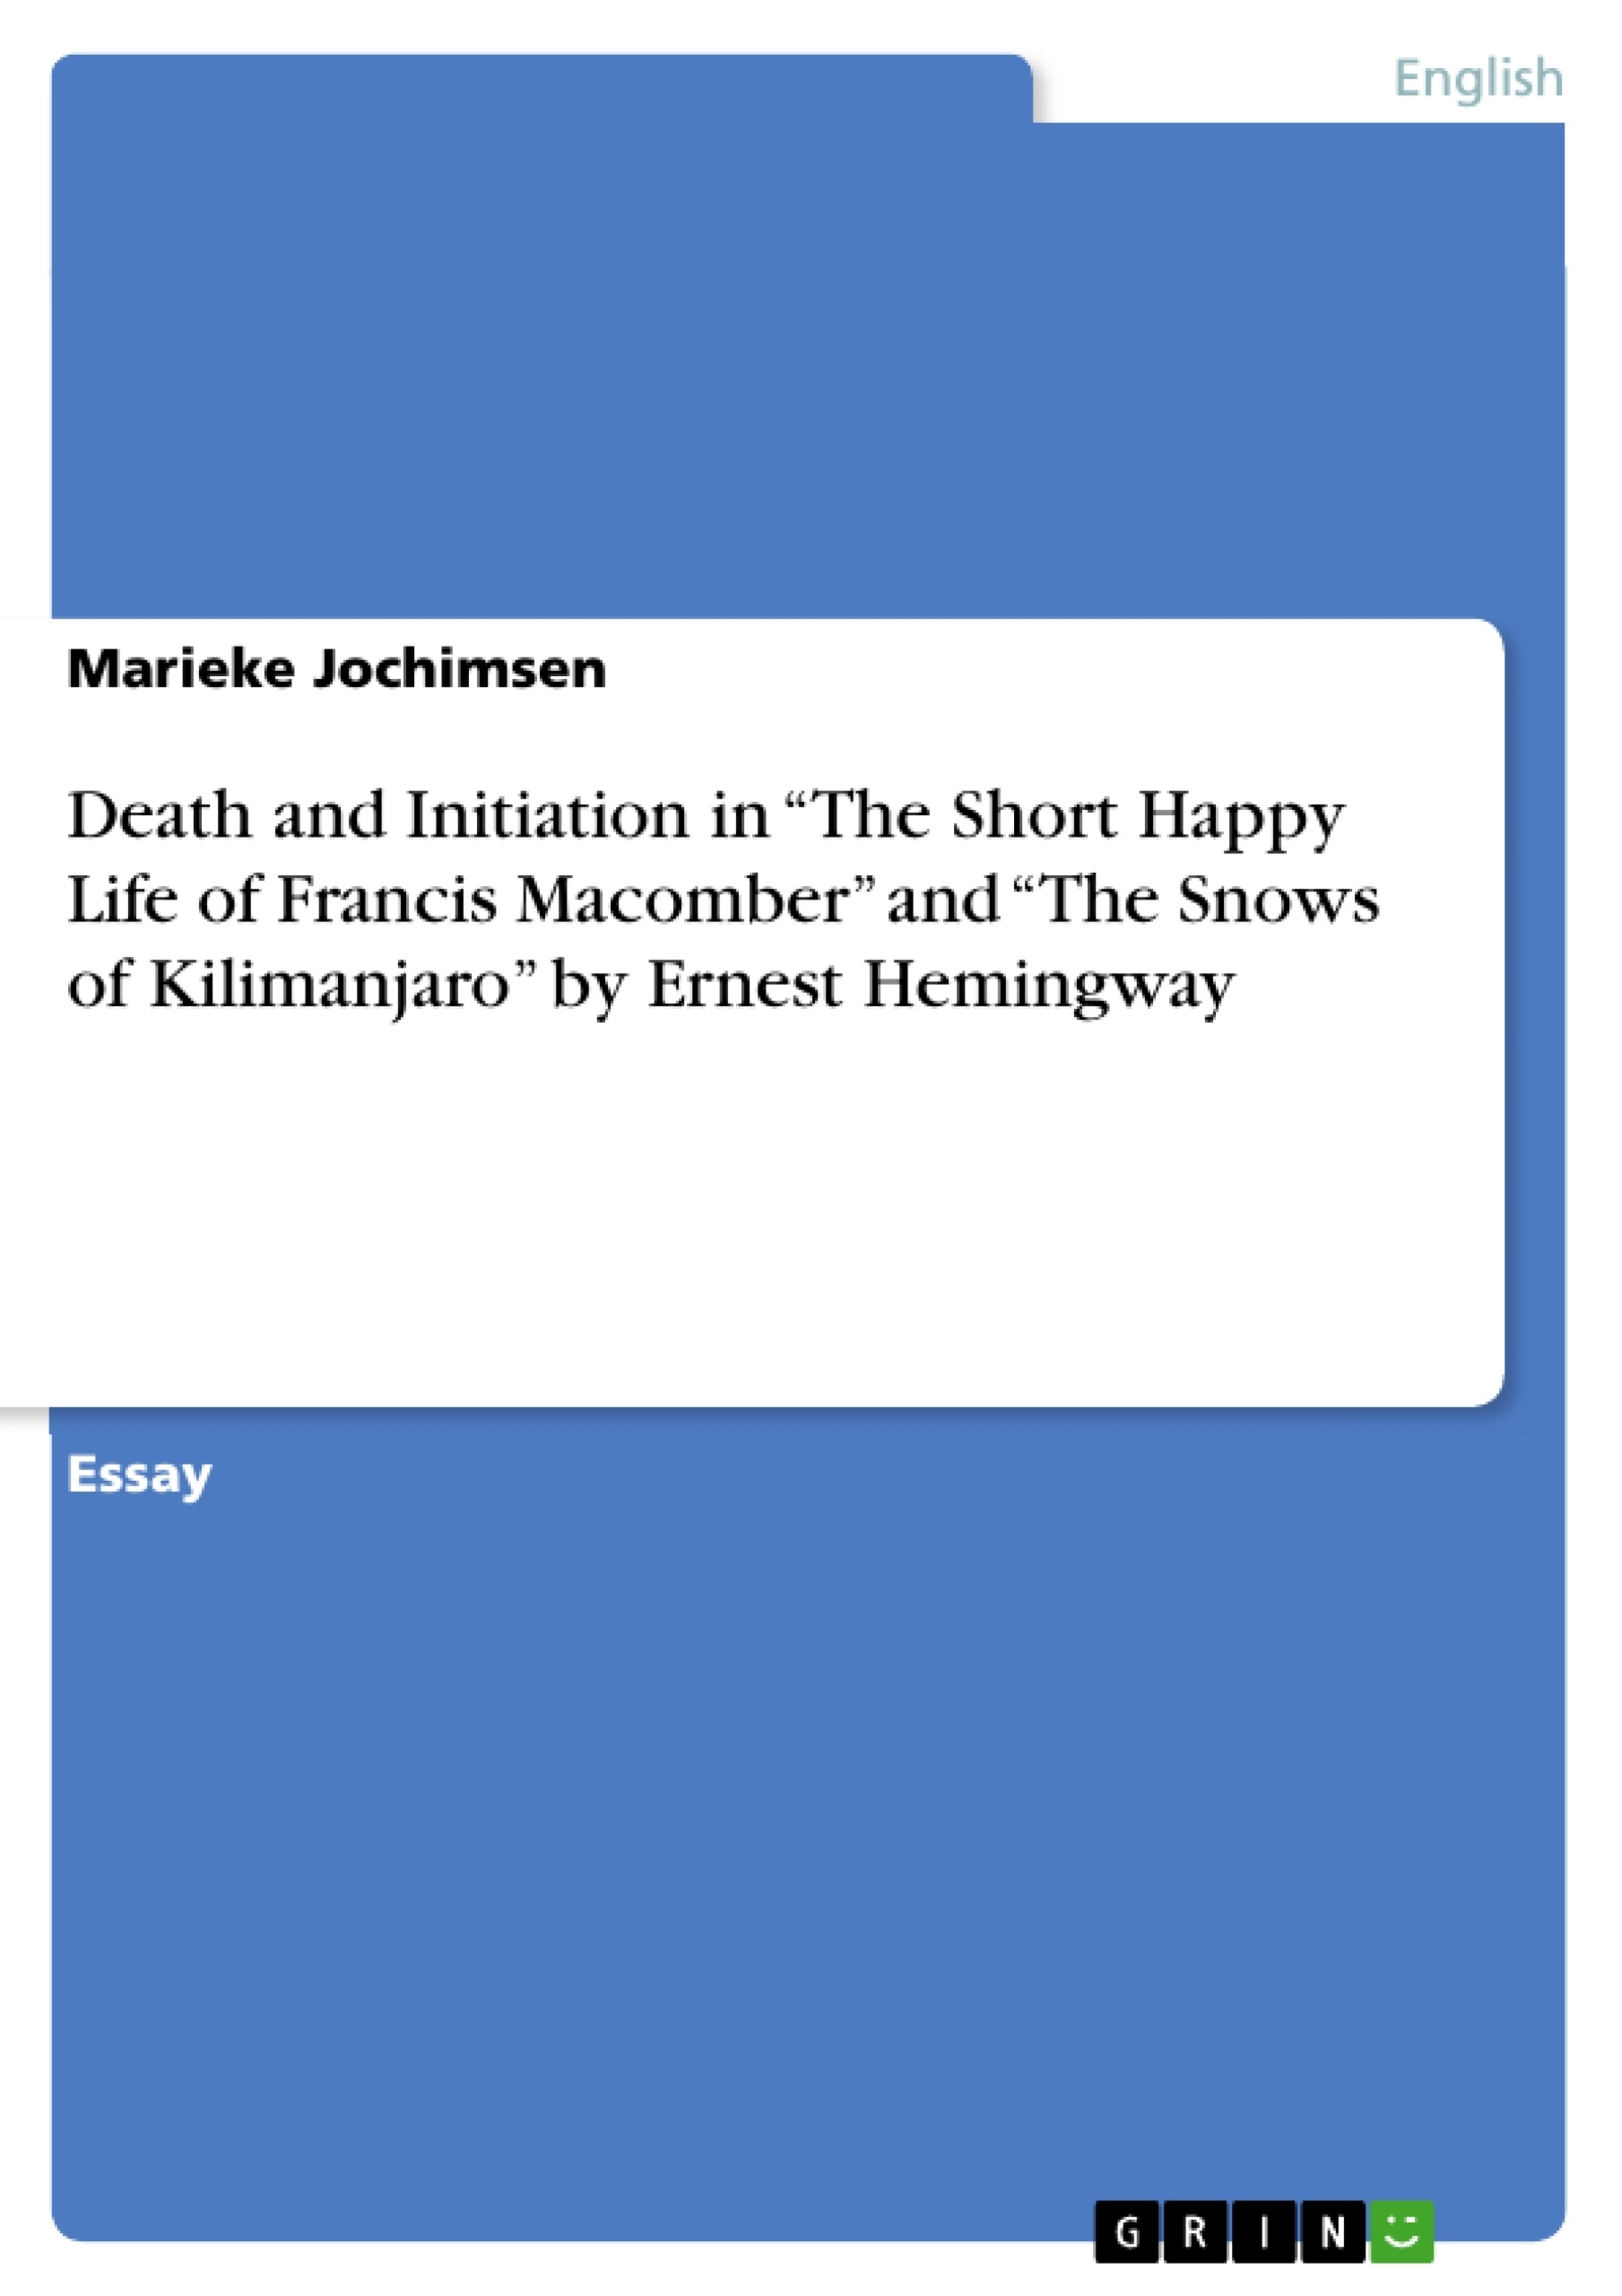 Titre: Death and Initiation in “The Short Happy Life of Francis Macomber” and “The Snows of Kilimanjaro” by Ernest Hemingway